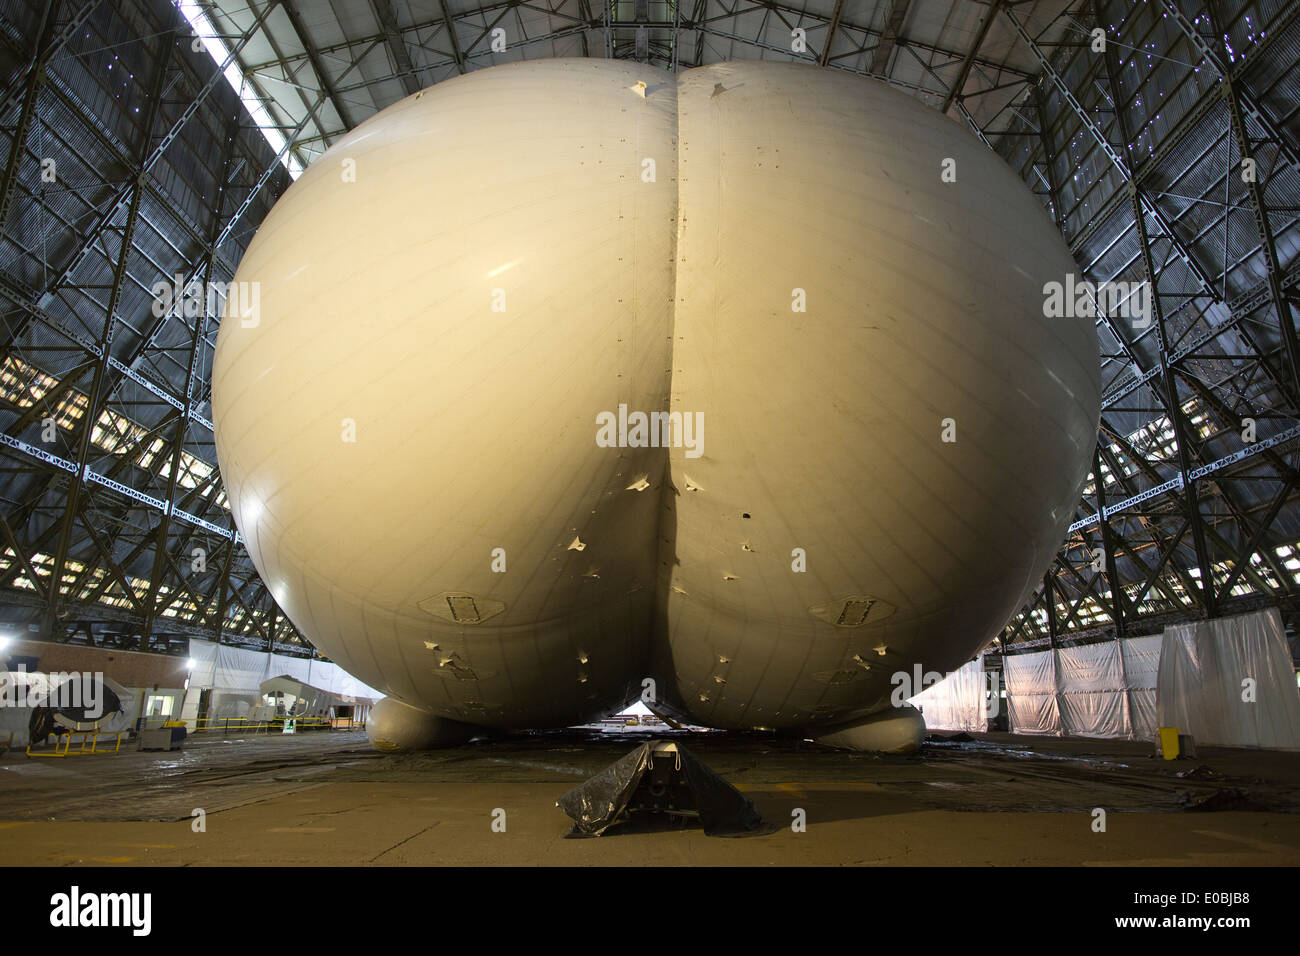 Airlander 10, world's largest aircraft and most advanced airship, in a airship hanger at the former RAF Cardington, Bedfordshire Stock Photo